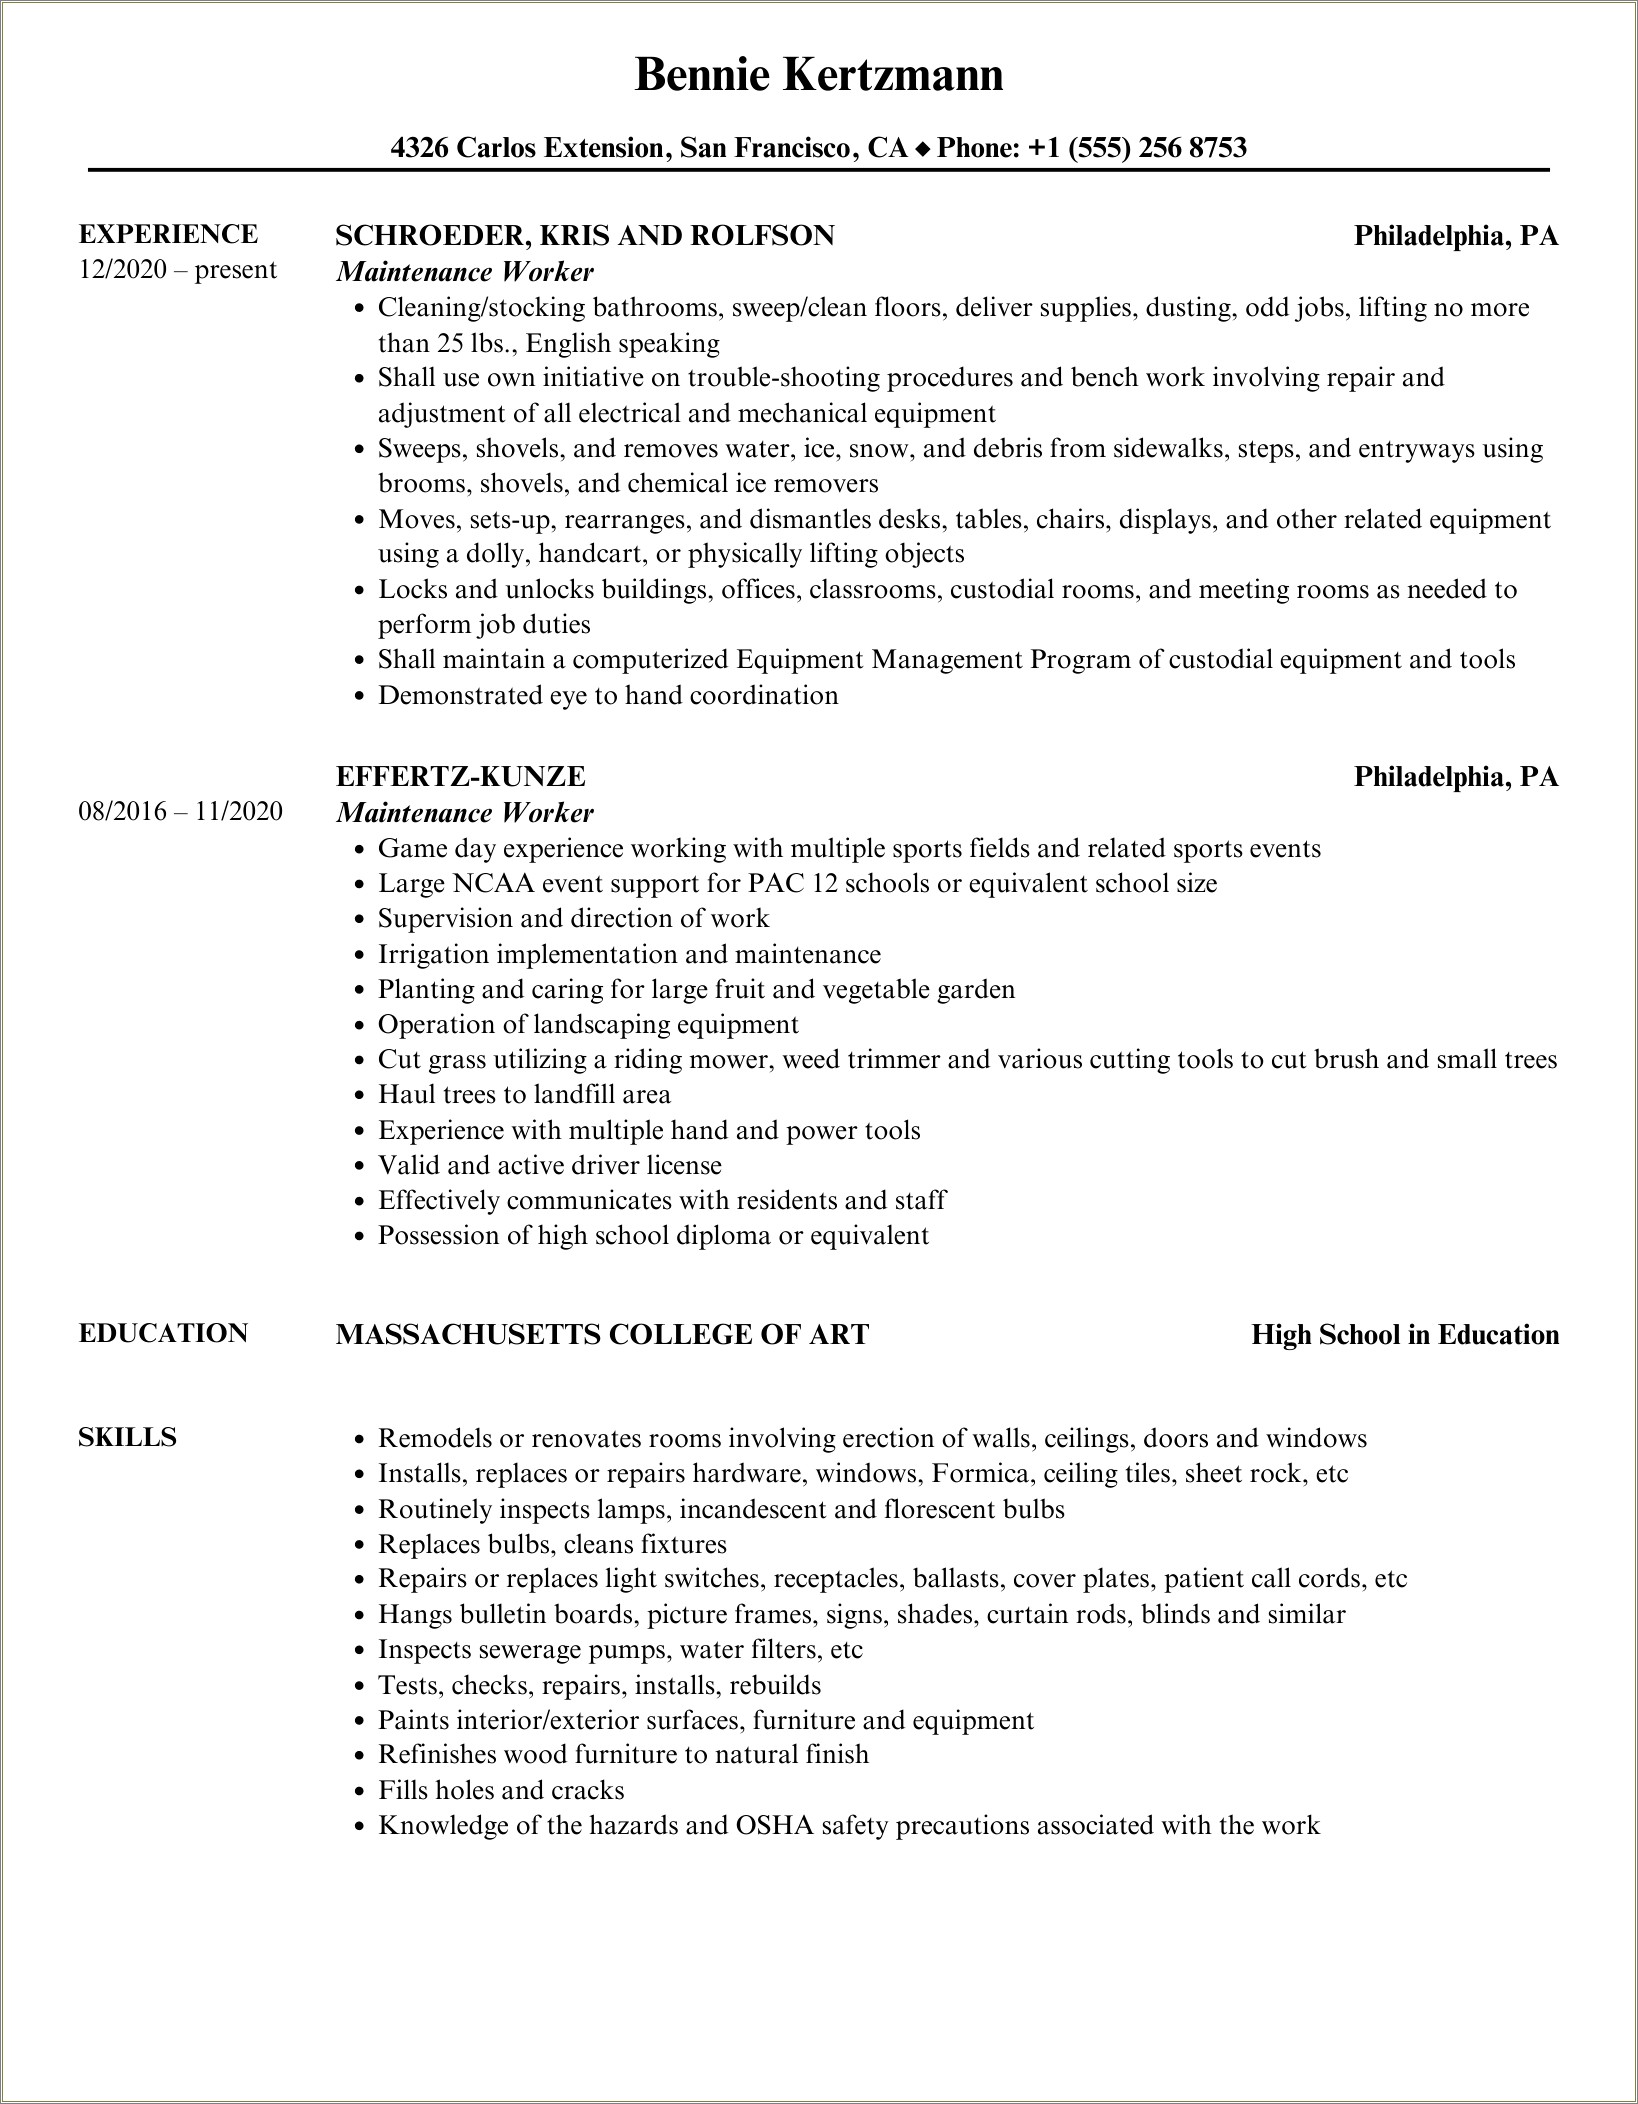 Resume For Maintenance With No Experience